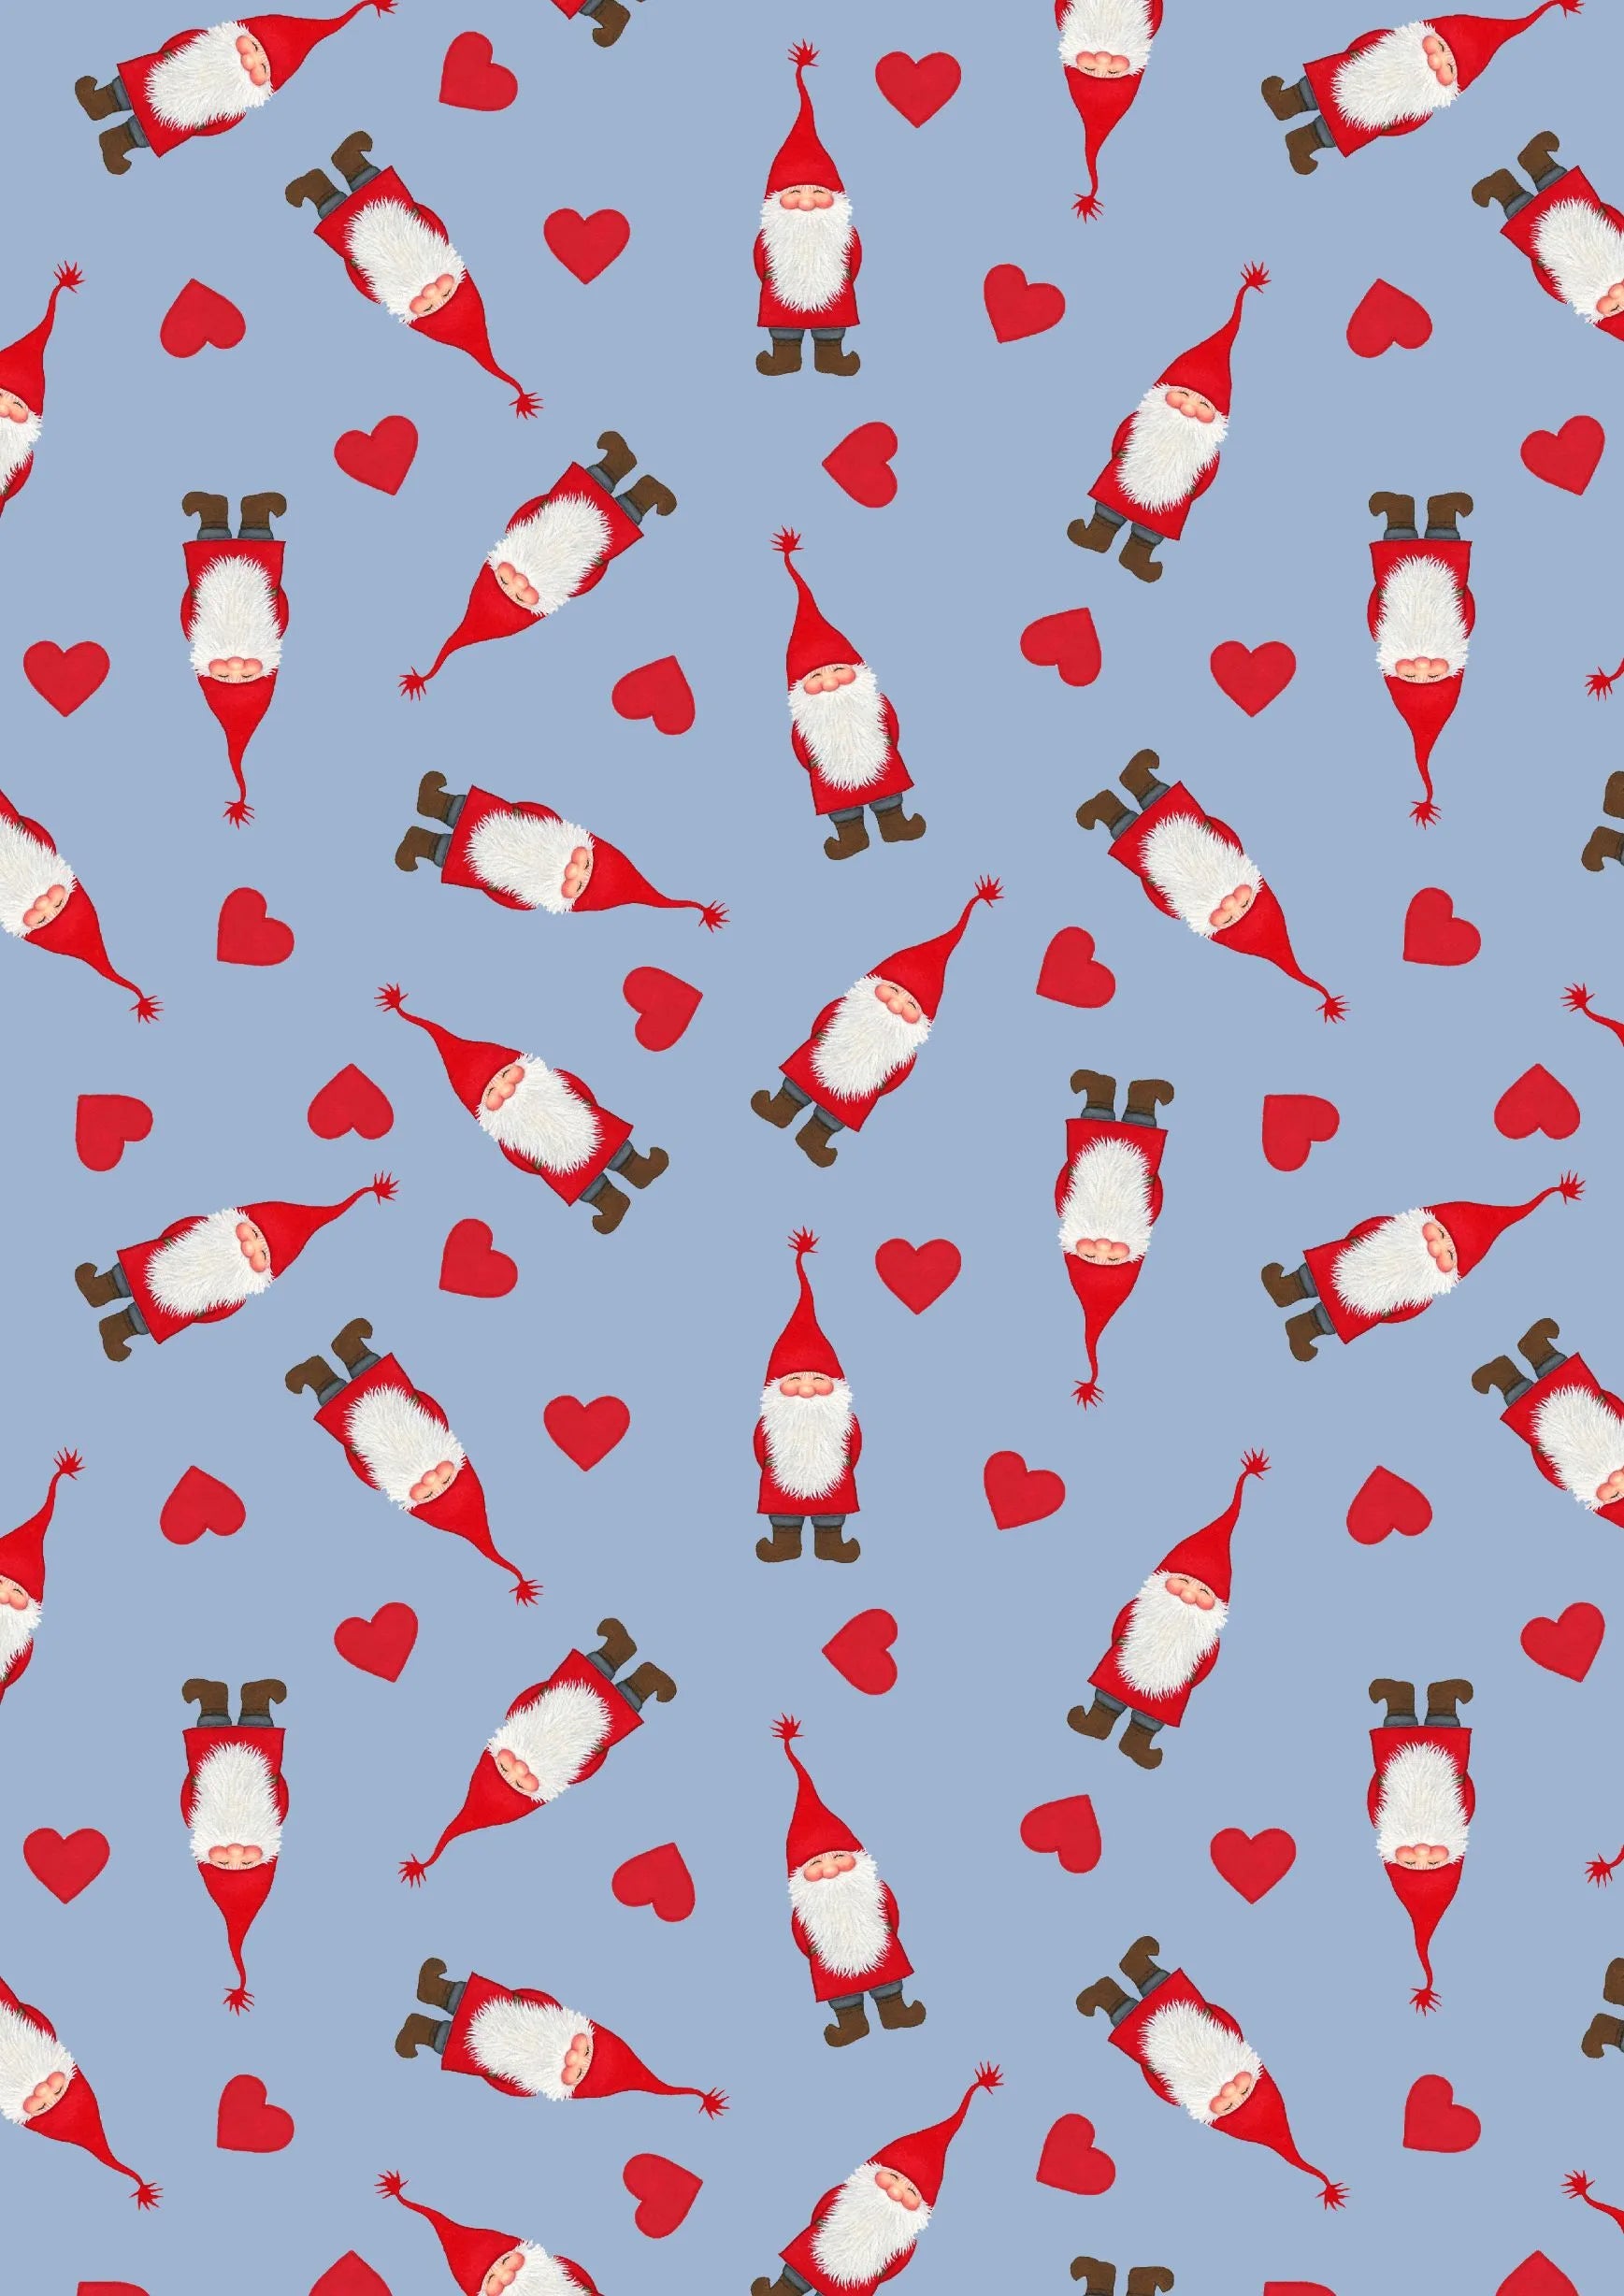 Tomtens Village by Lewis & Irene - Tomten and Hearts on Blue - Holiday Fabric (half yard)